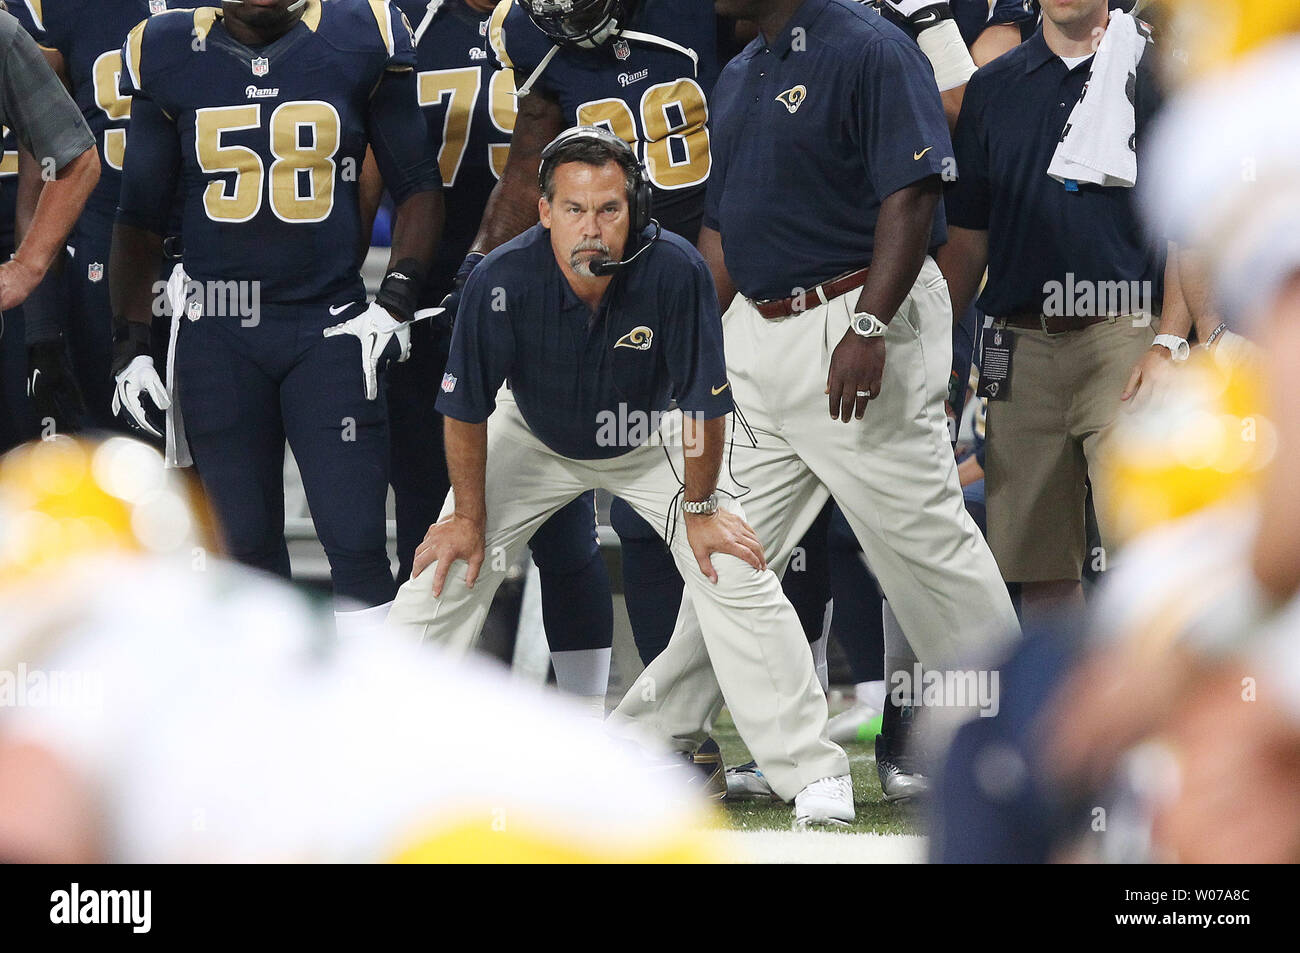 St. Louis Rams head football coach Jeff Fisher watches the action against the Green Bay Packers during their pre season game at the Edward Jones Dome in St. Louis on August 17, 2013.   UPI/Bill Greenblatt Stock Photo